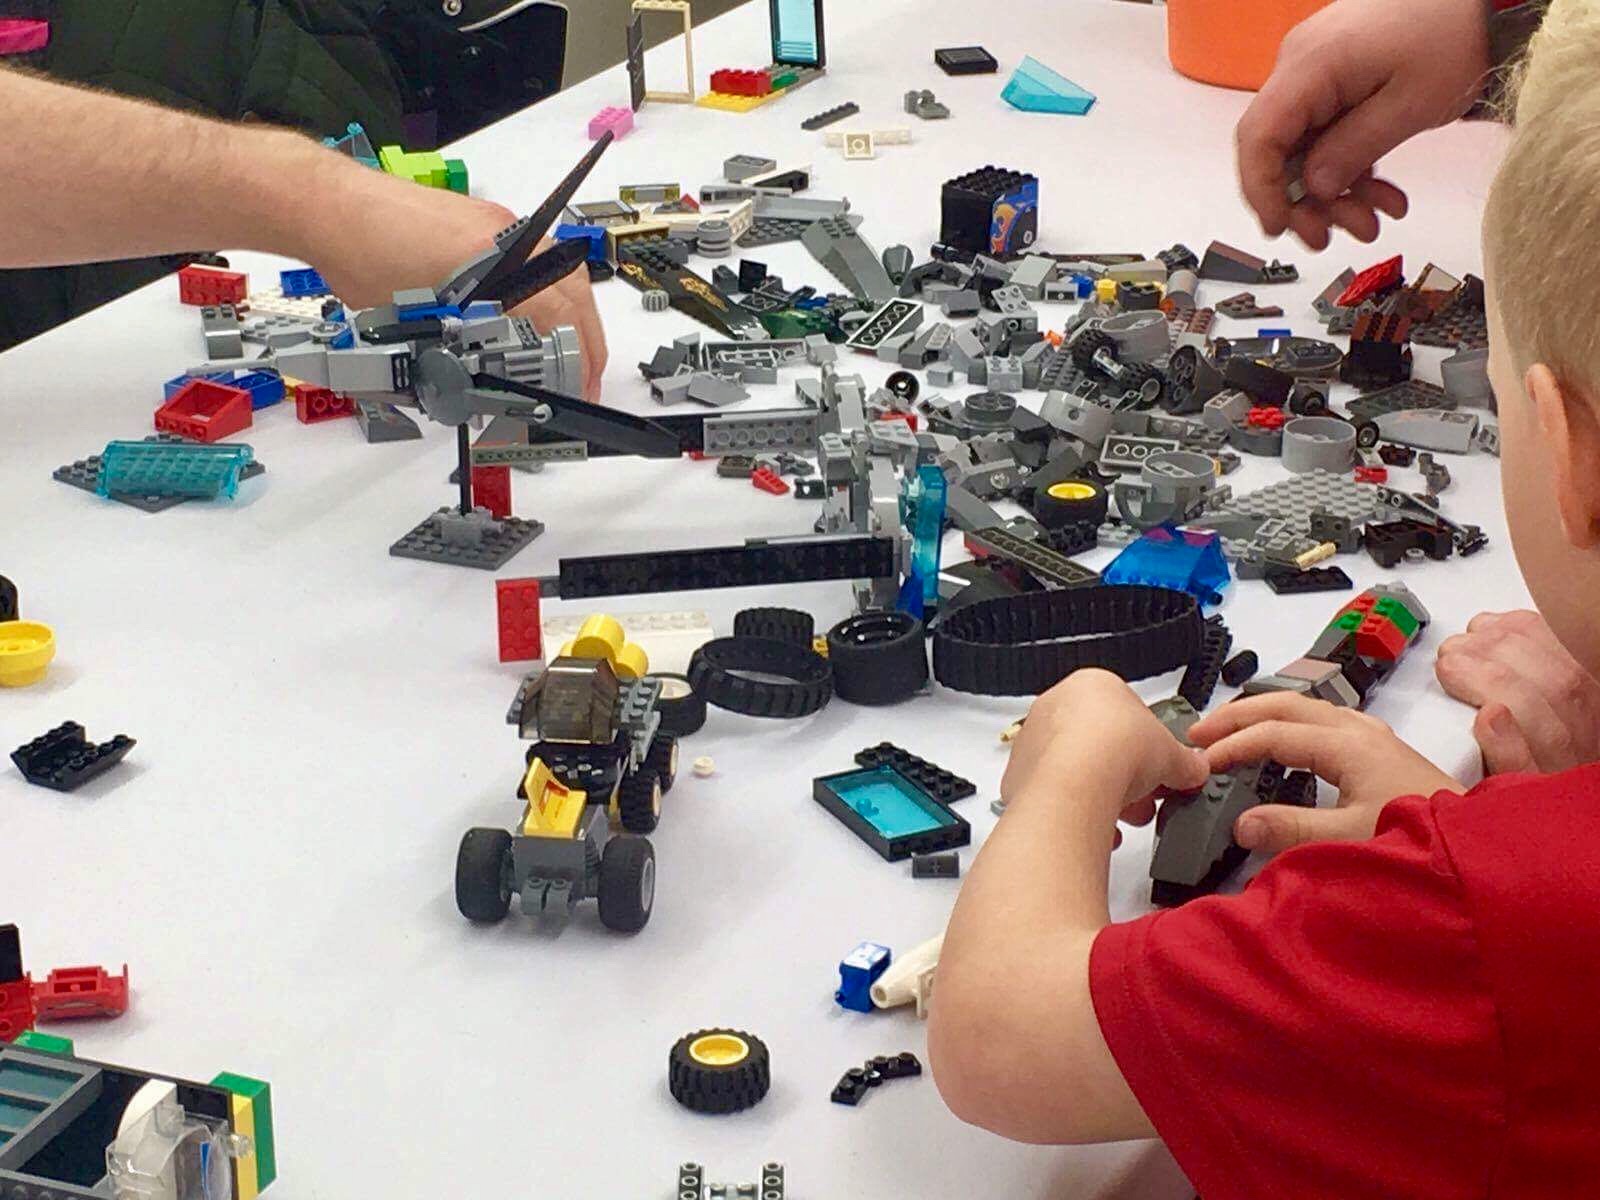 News: Exeter's new Lego shop 'Brick and Mix' announces opening date ...